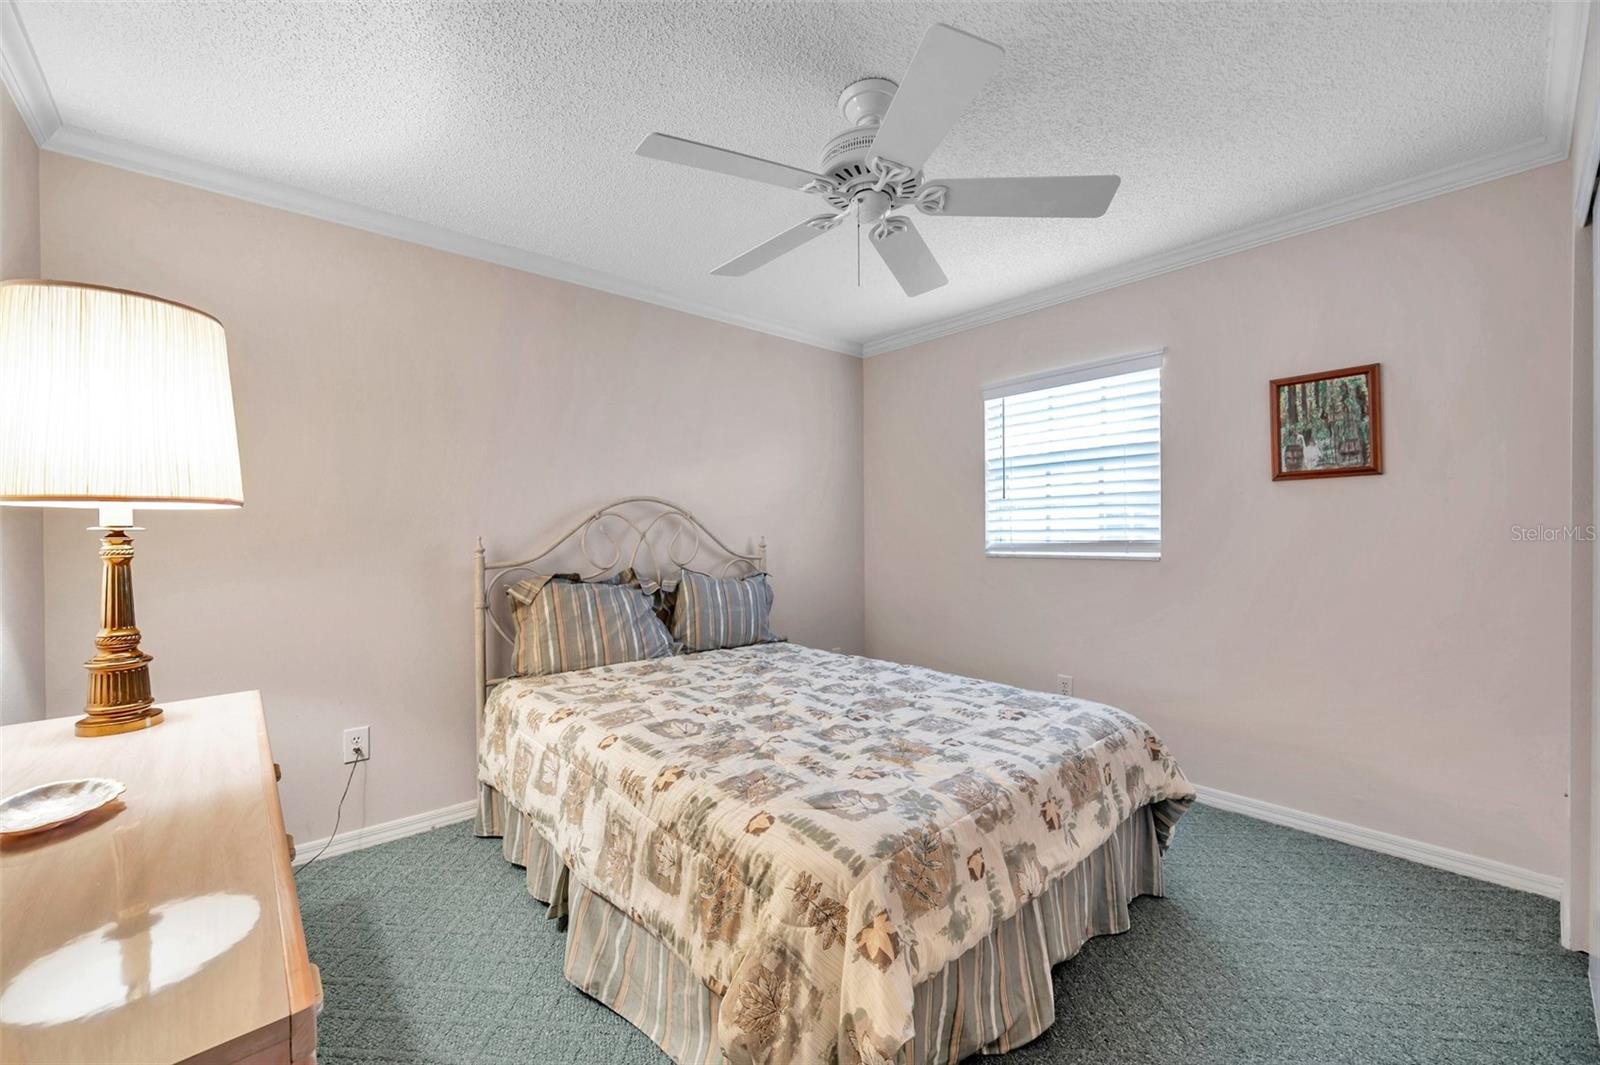 Guest bedroom has carpet, ceiling fan and a window!